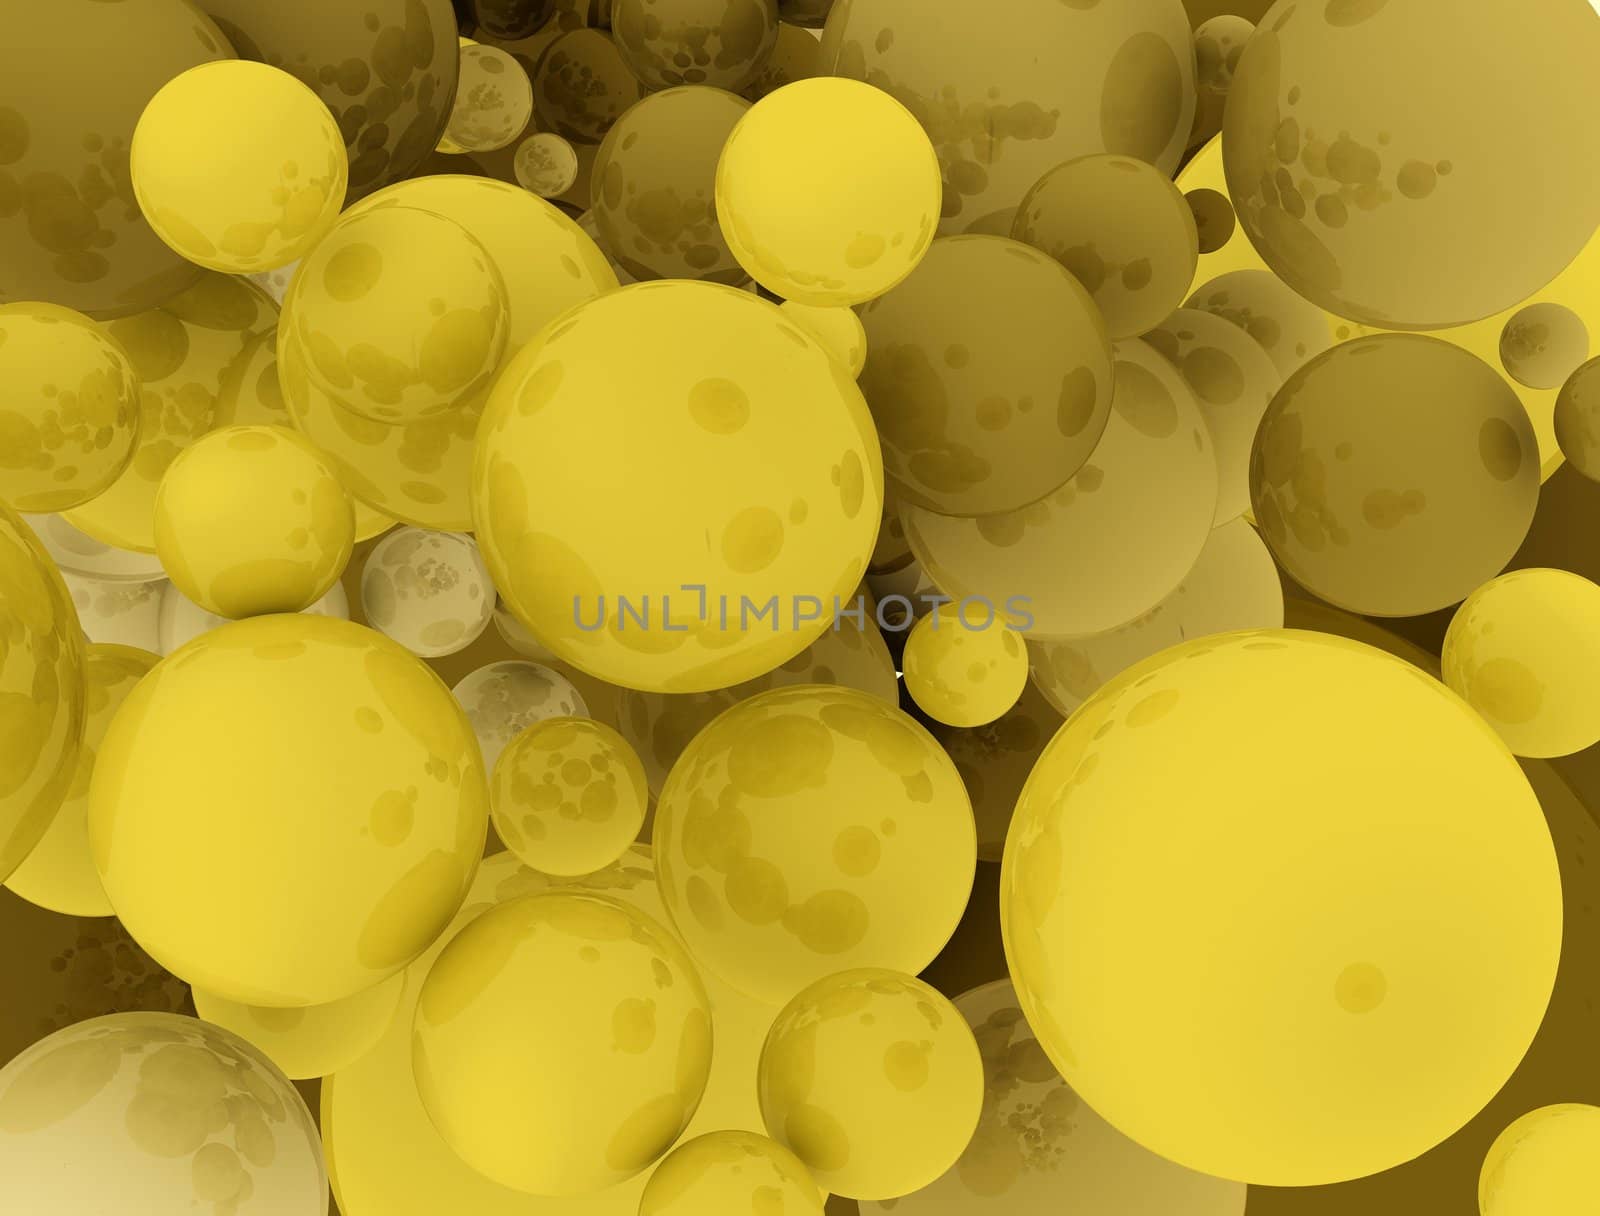 Conceptual abstract background consisting of spheres fulfilling whole area of view. Concept is rendered with slight reflections and spheres are portrayed in various sizes and golden color variations.